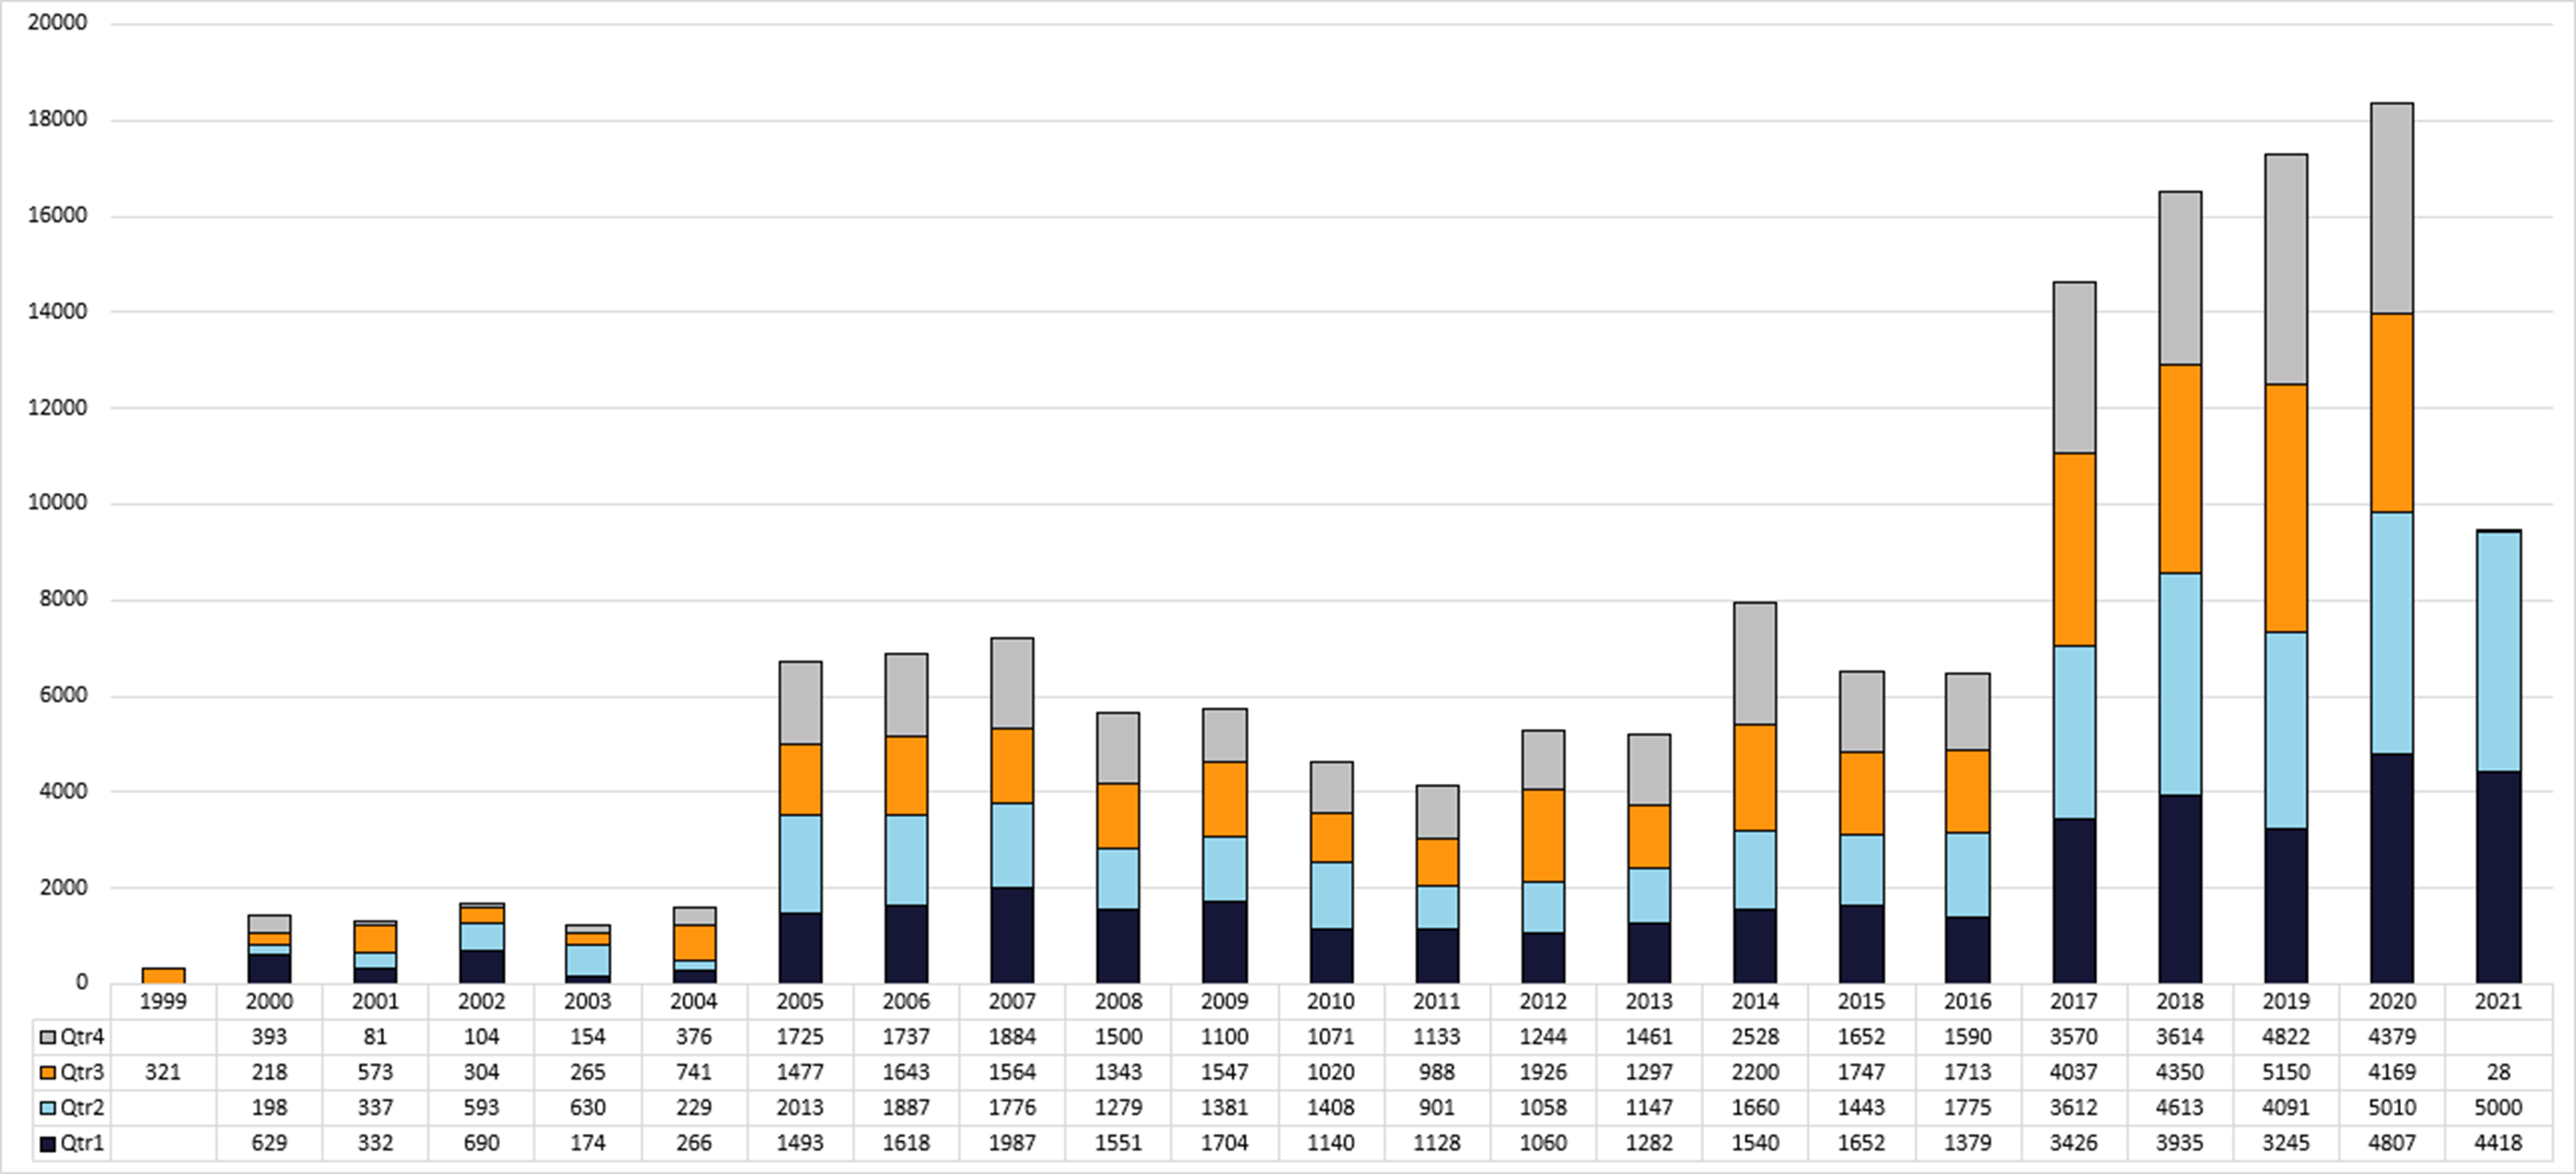 Comparison of Published CVE Records by Year for All Quarters - Q2 CY 2021